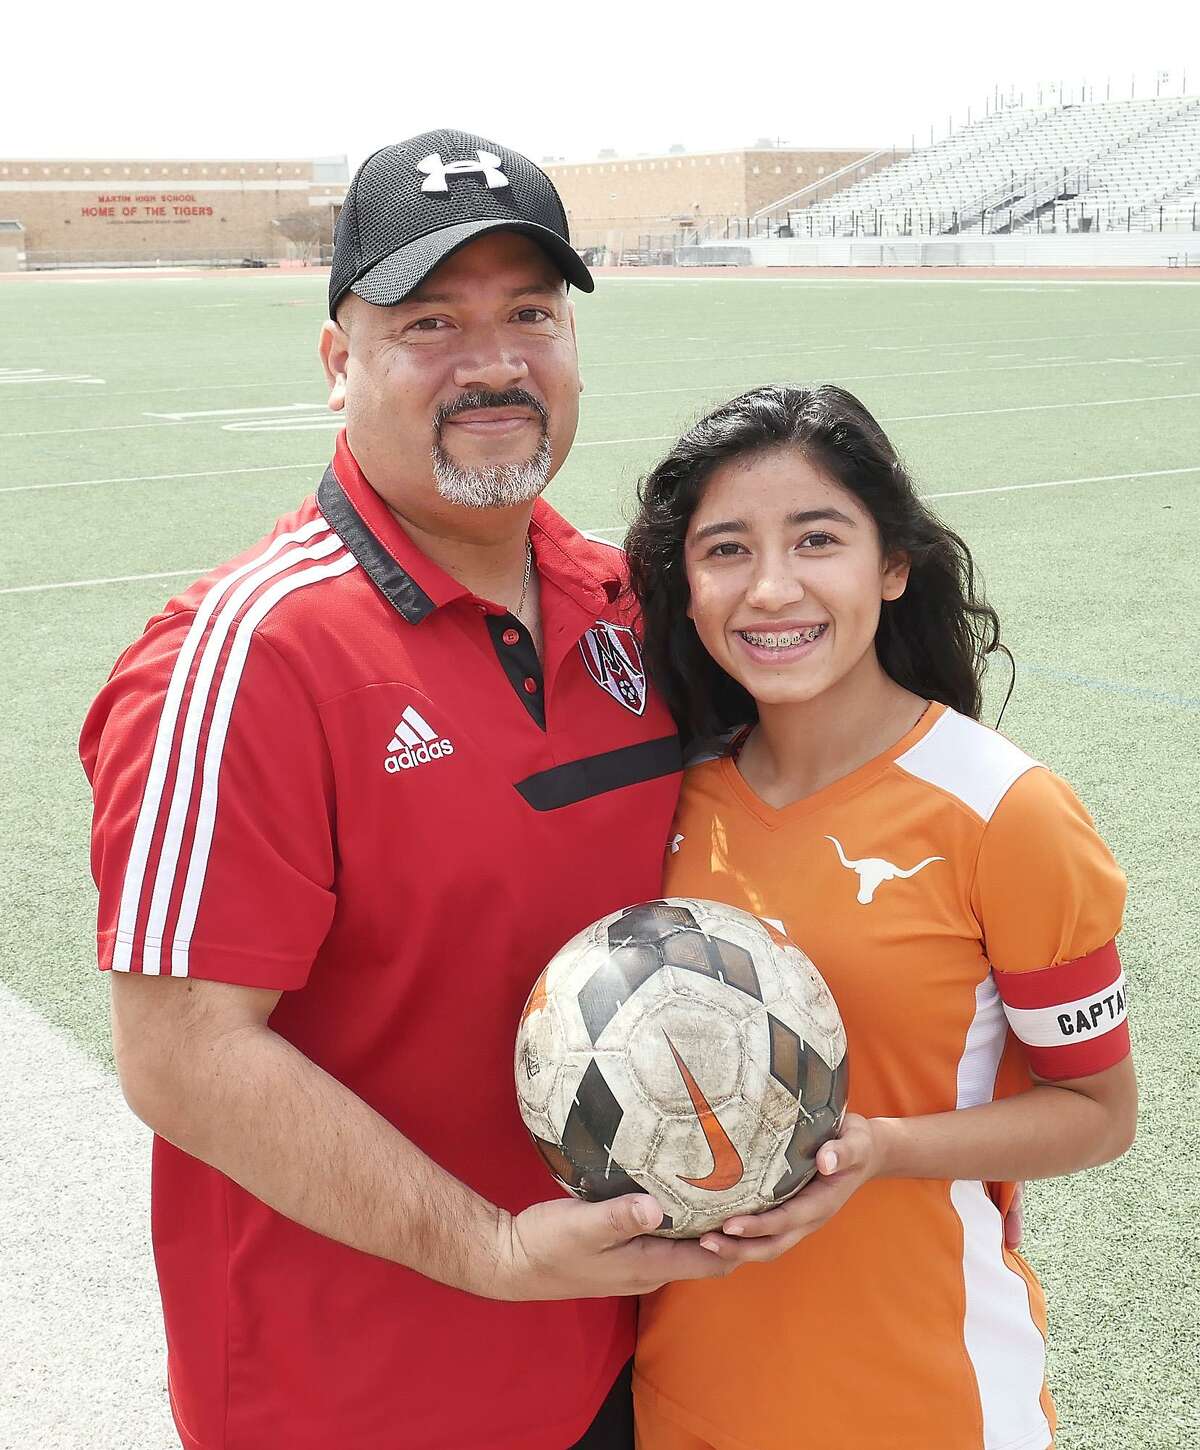 David Valdez is the head coach for girls’ soccer at Martin while his daughter Clarissa is a captain for United.